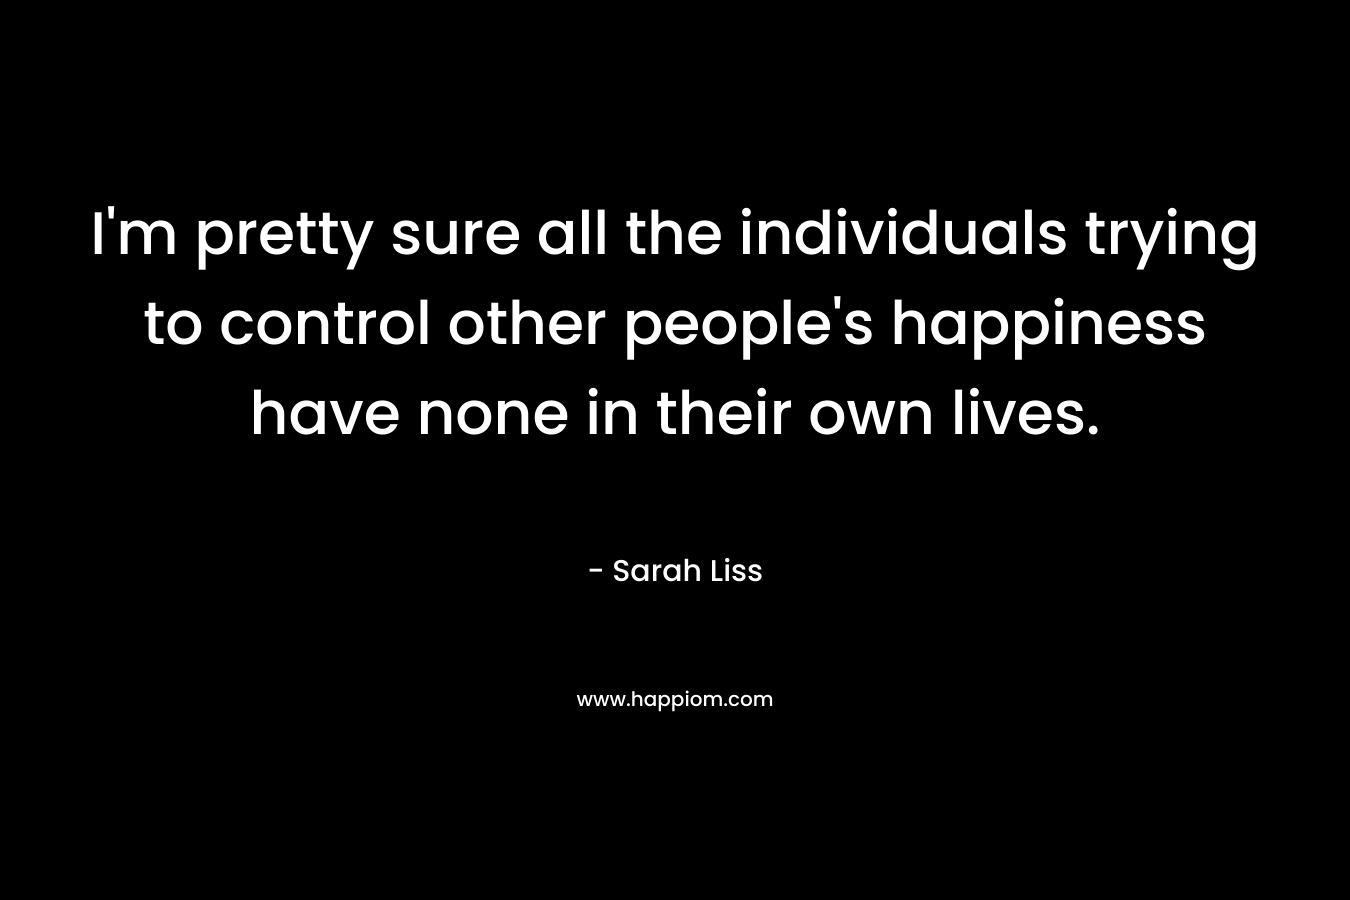 I’m pretty sure all the individuals trying to control other people’s happiness have none in their own lives. – Sarah Liss